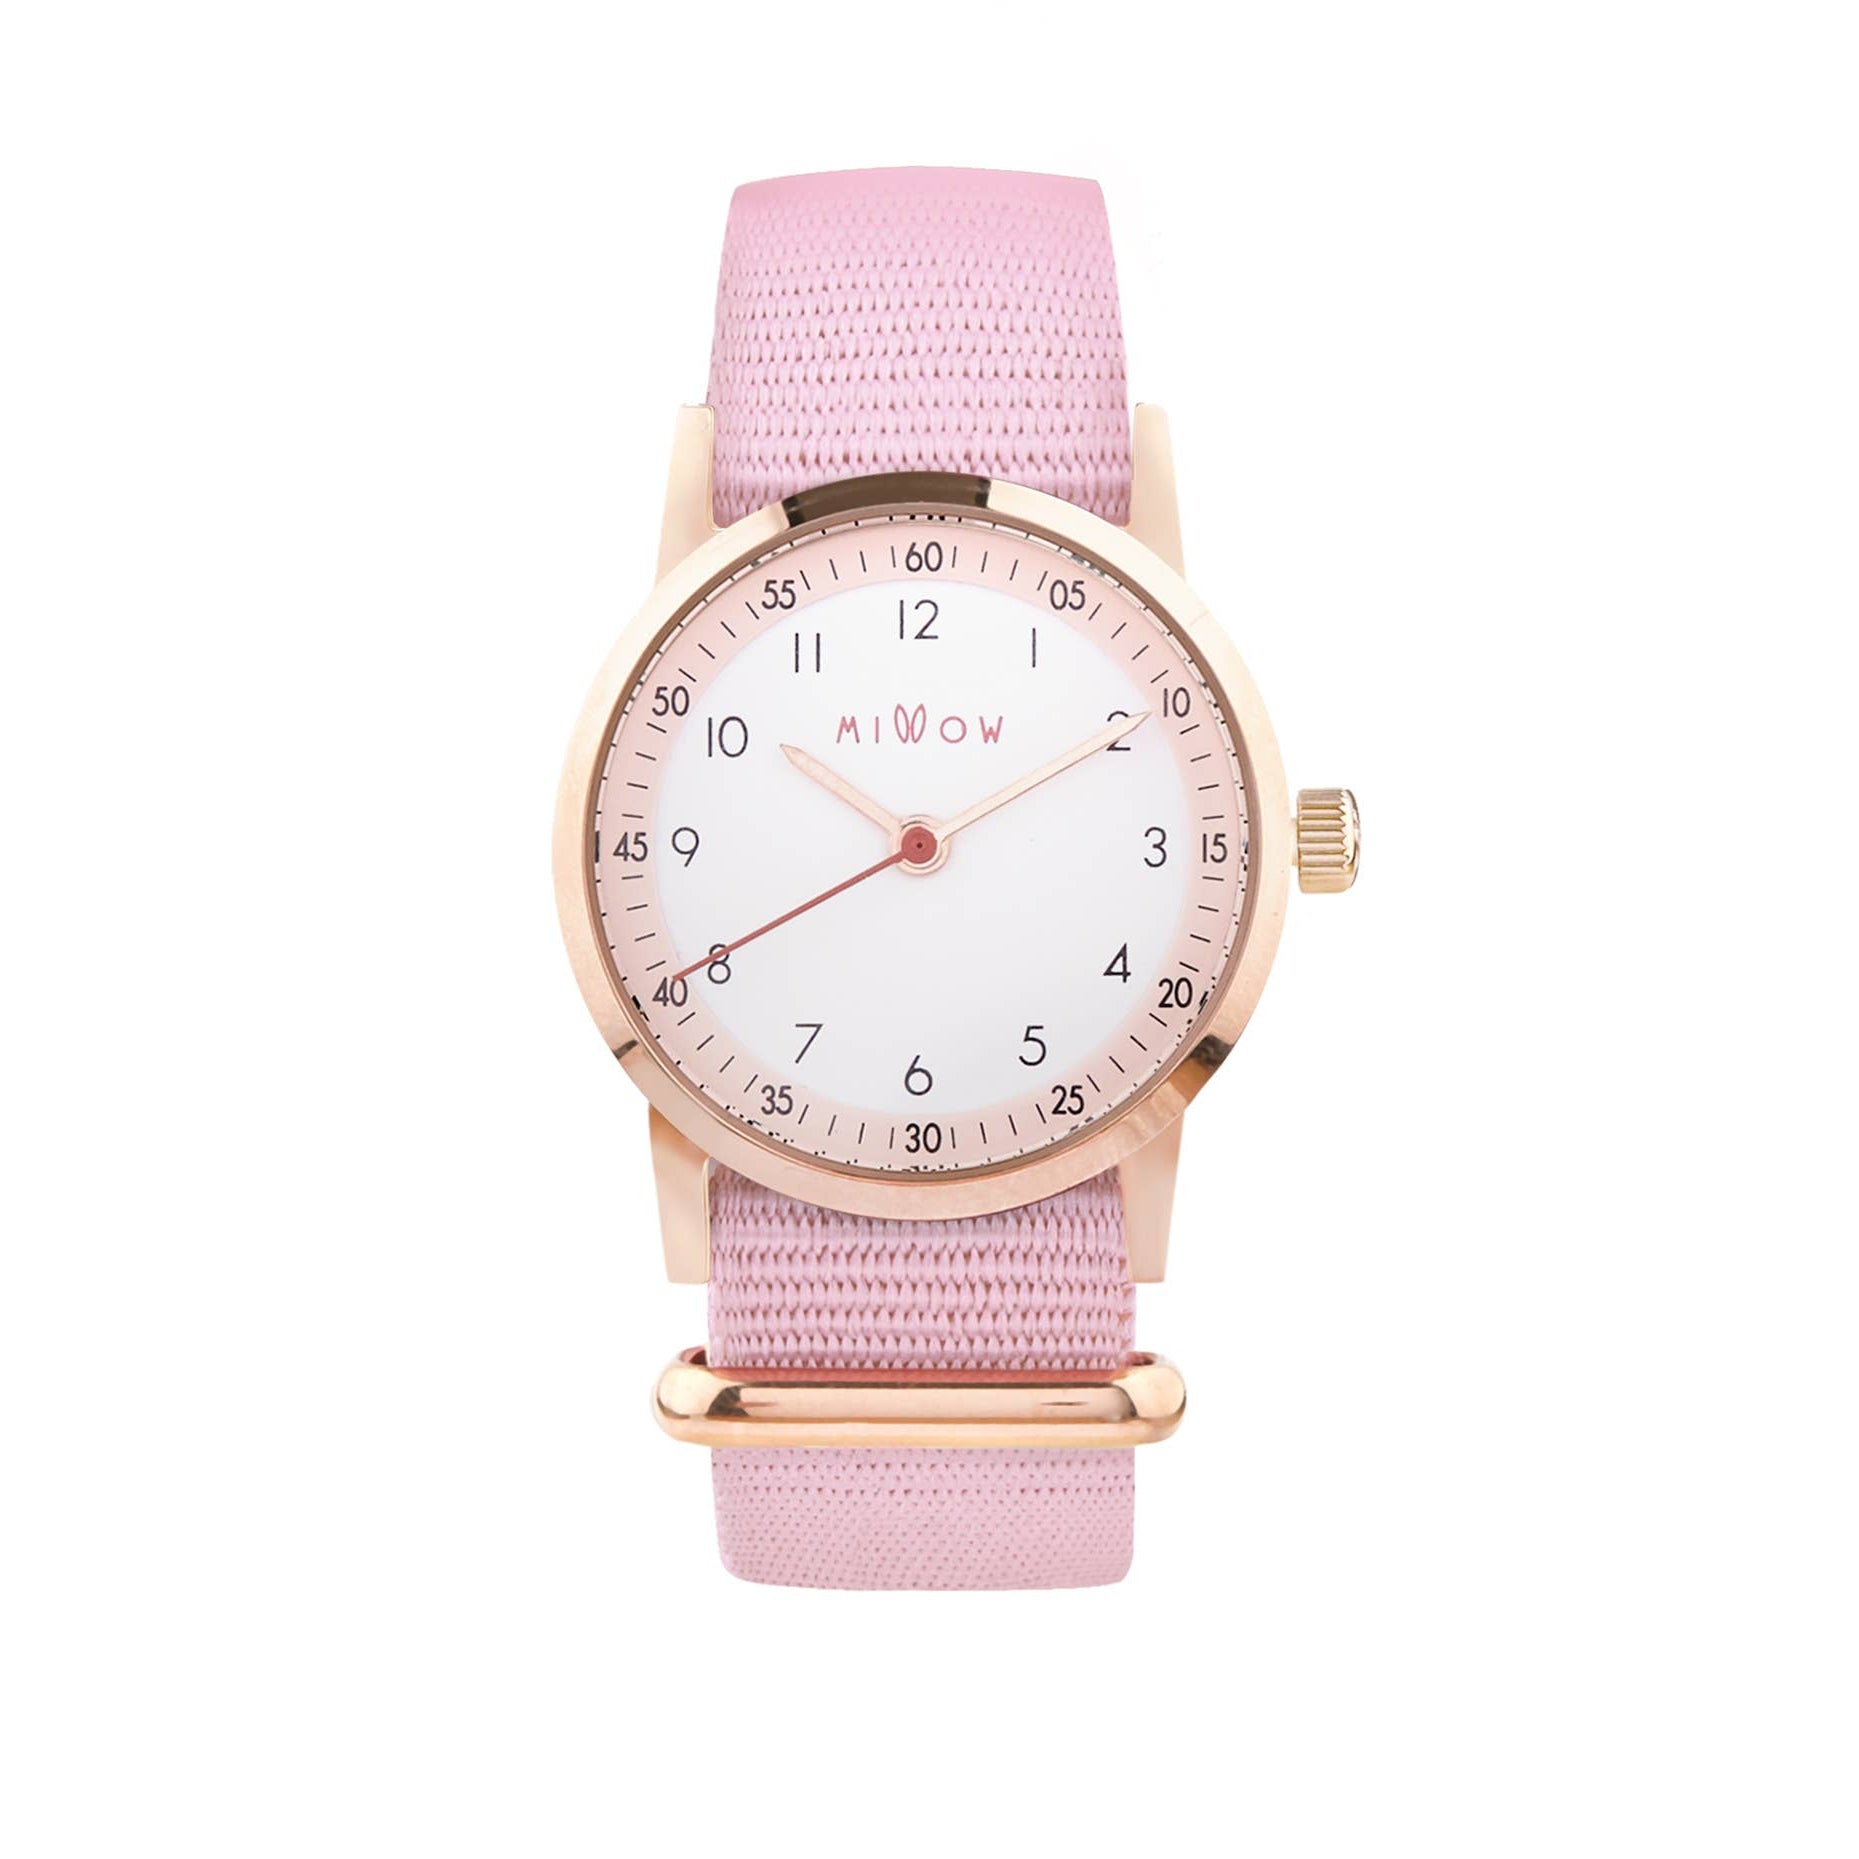 Millow Paris Millow Blossom Watch For Children - Candy Pink Strap Watche